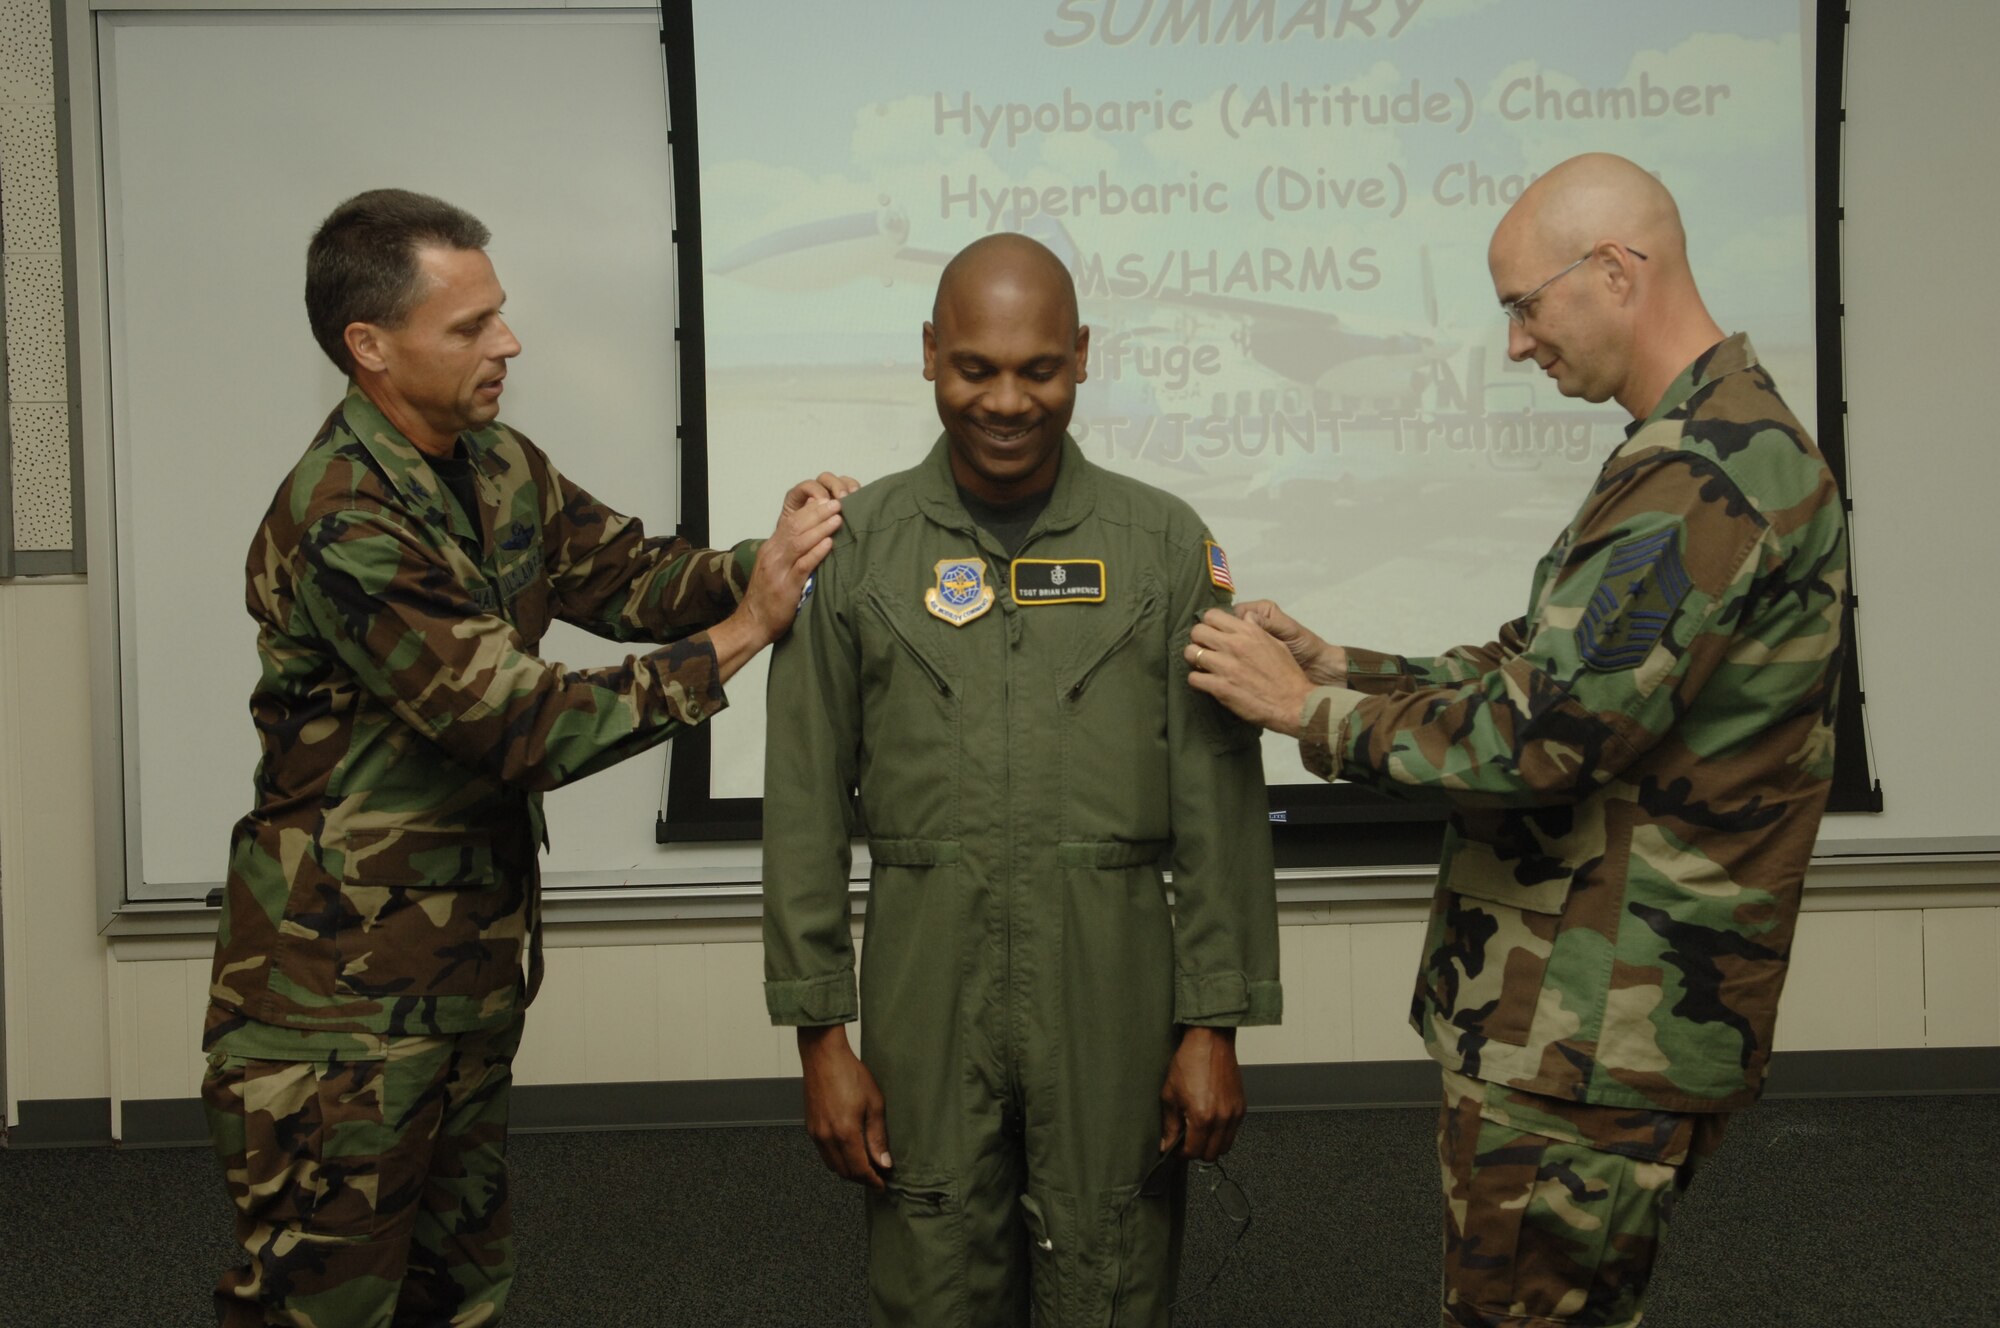 FAIRCHILD AIR FORCE BASE, Wash. - Colonel Scott Hanson, 92nd Air Refueling Wing commander, and Chief Master Sgt. Mark Luzader, 92nd ARW command chief, attach master sergeant stripes to Brian Lawrence, 92nd Aeromedical Dental Squadron NCO in change of aerospace physiology training flight operations. (U.S. Air Force photo/Senior Airman Chad Watkins)